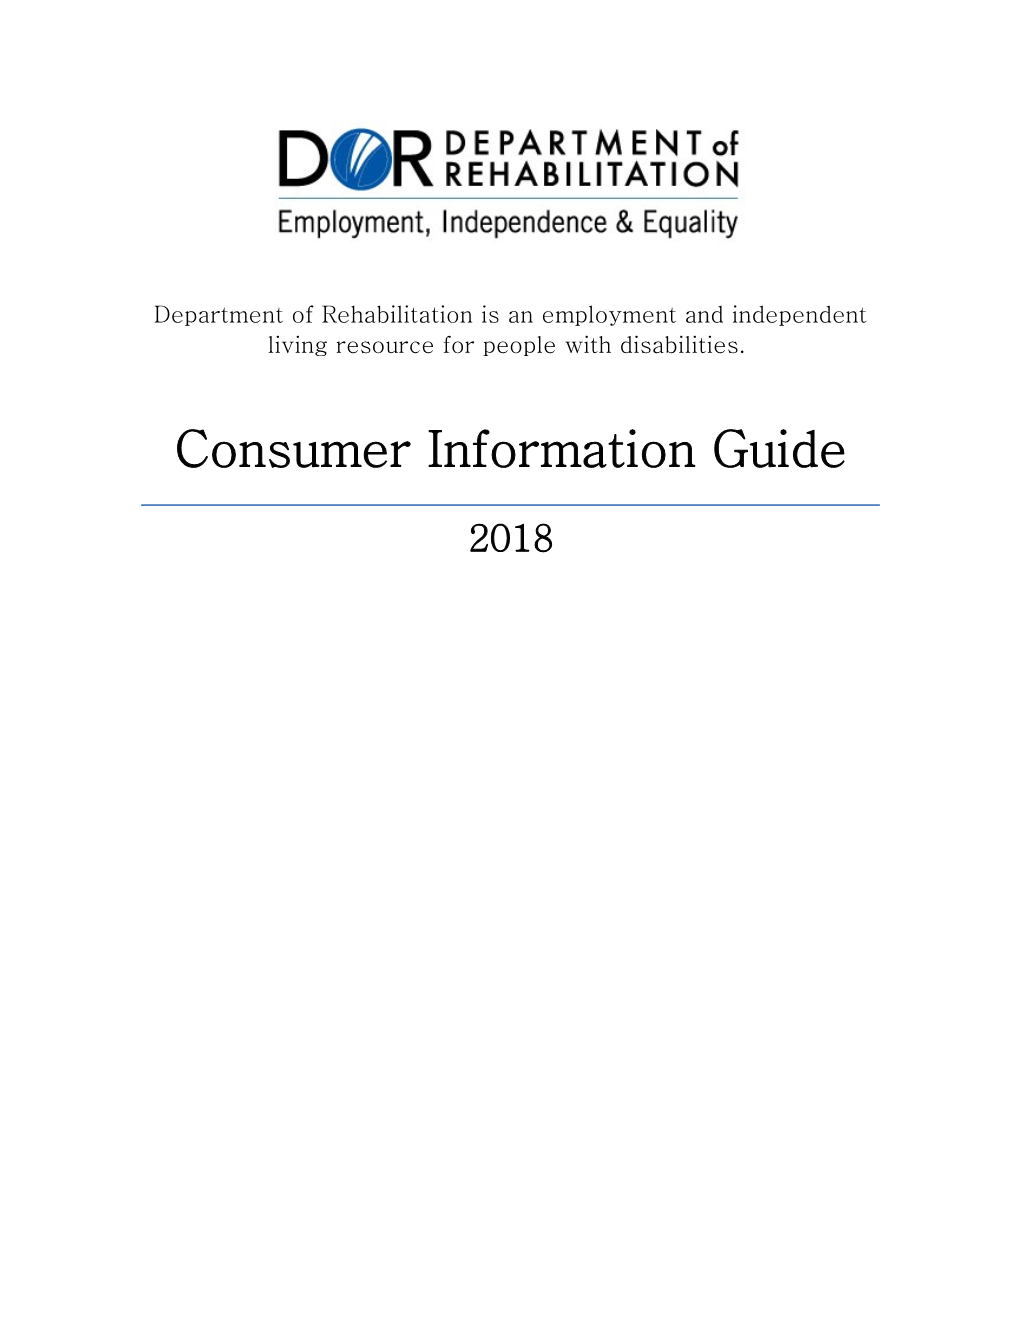 Consumer Information Guide s1